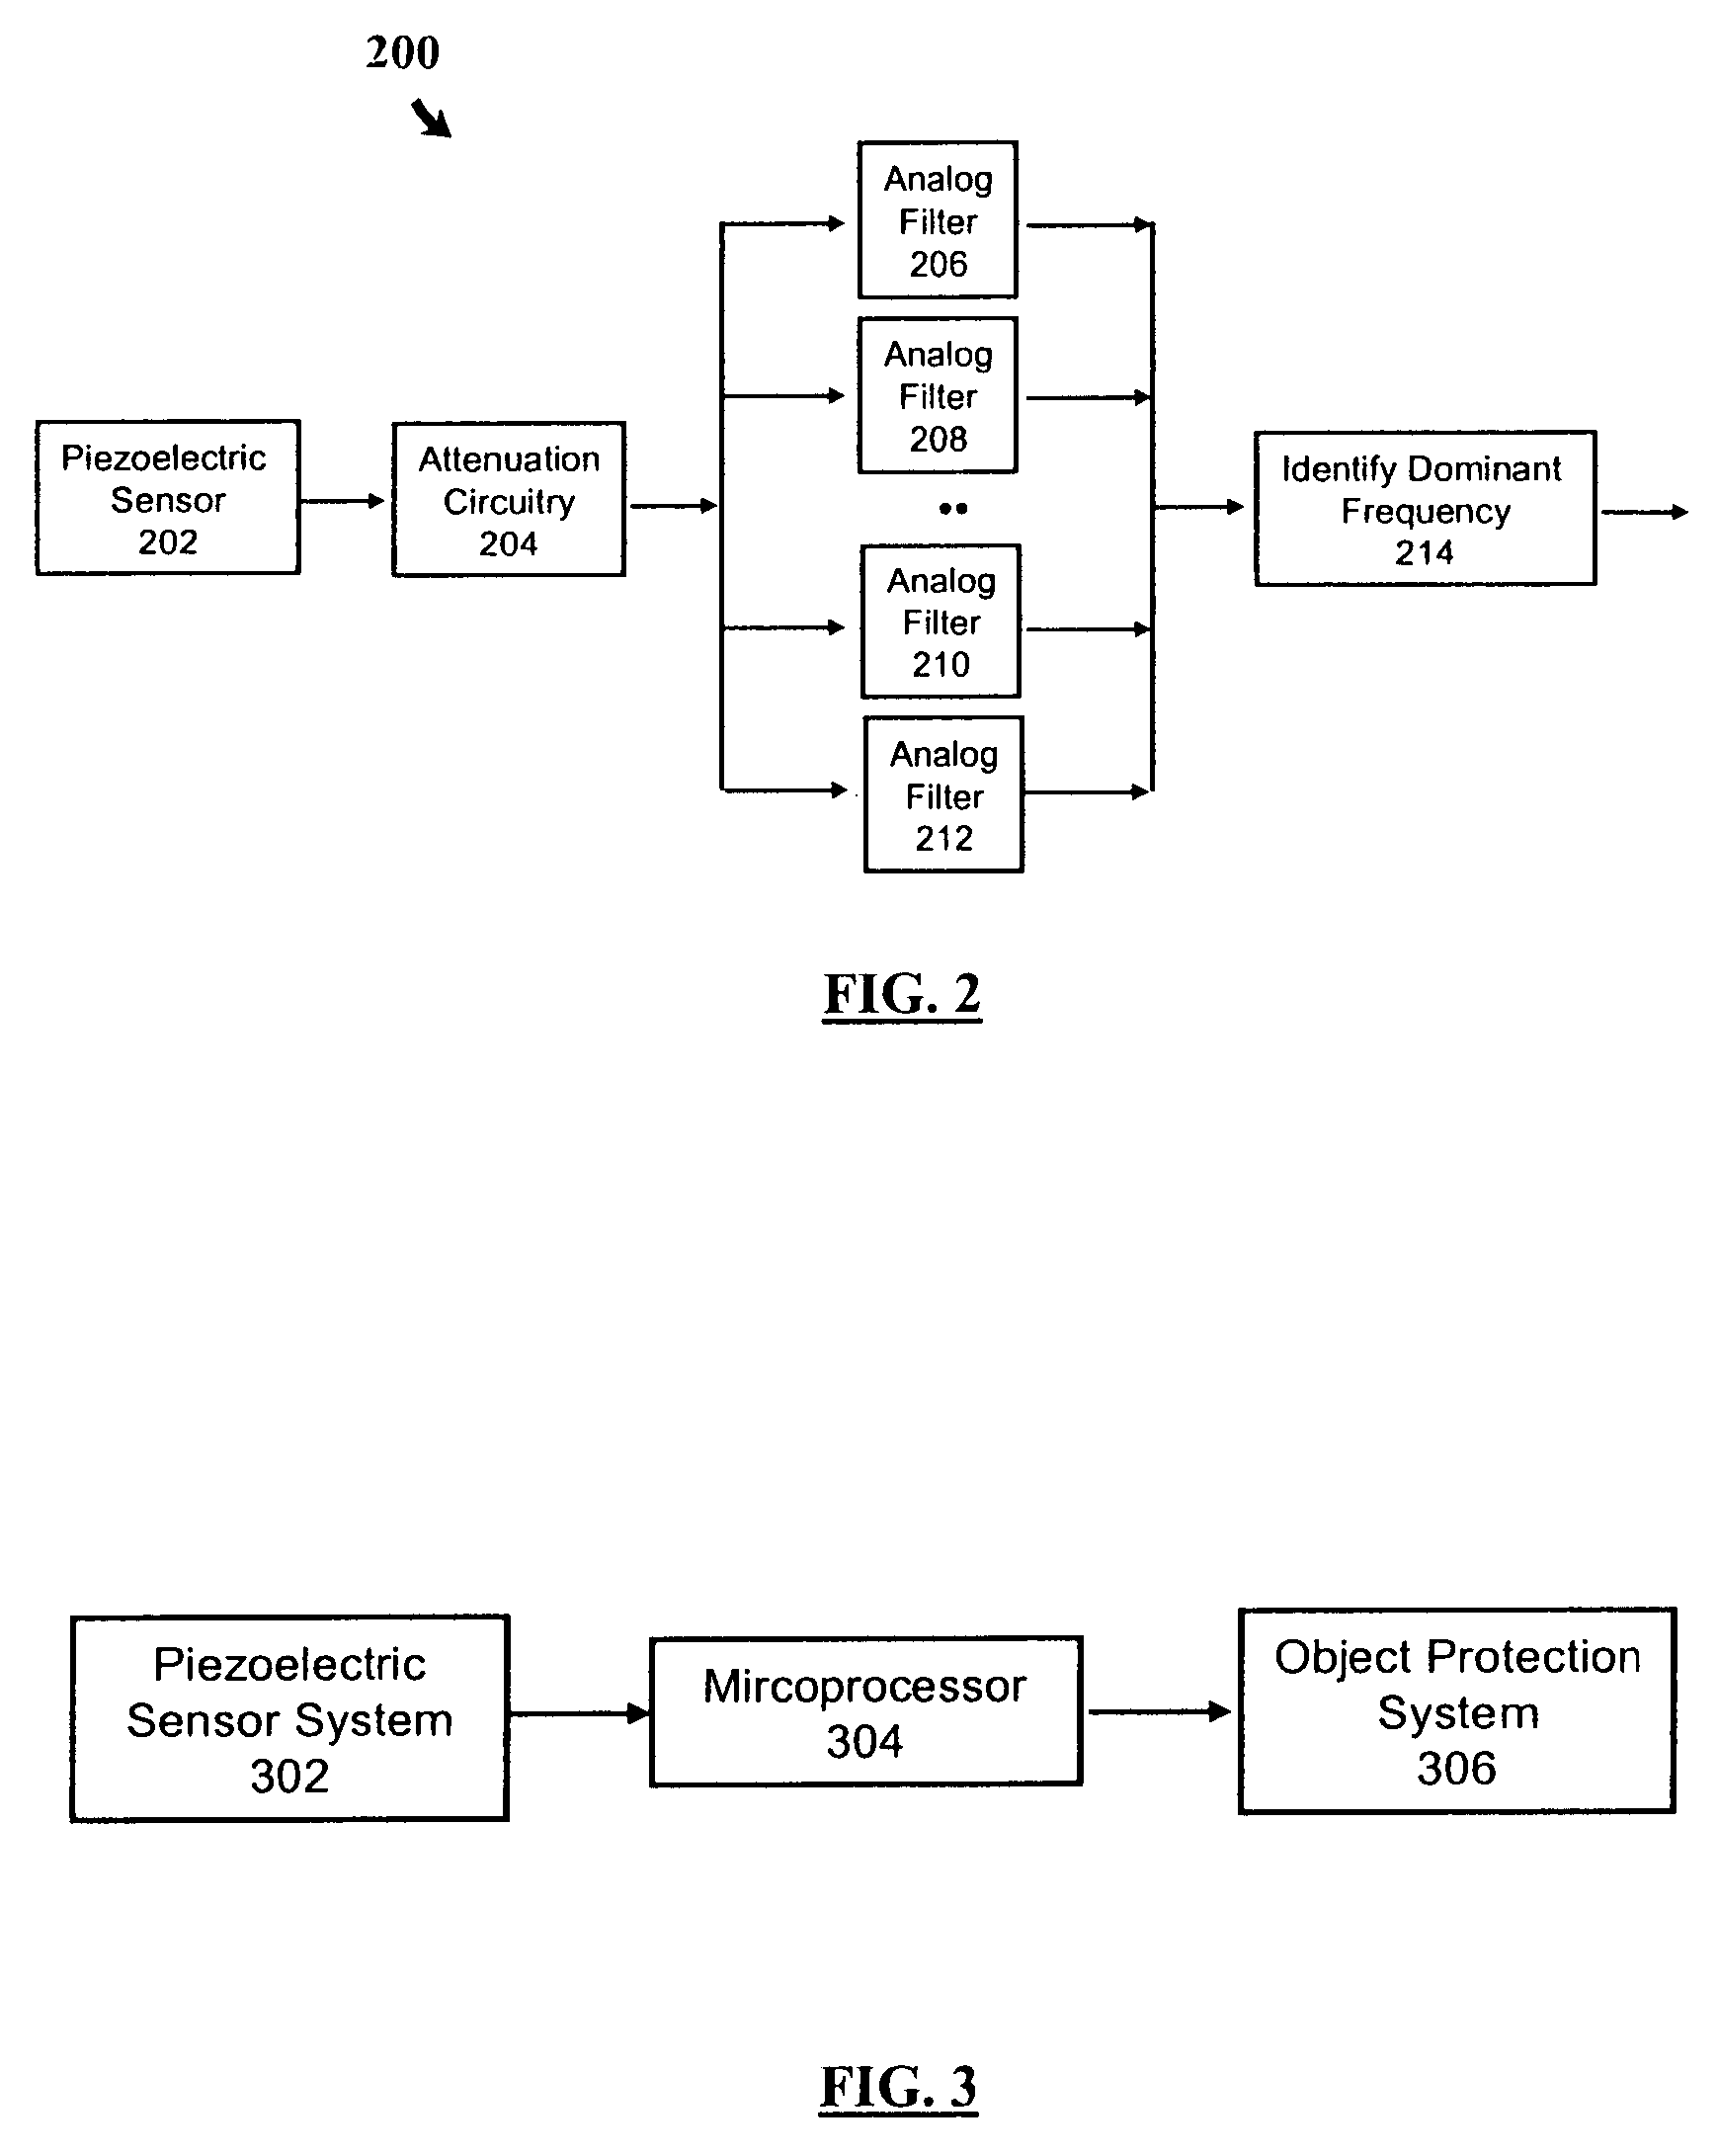 Single-wire sensor/actuator network for structure health monitoring